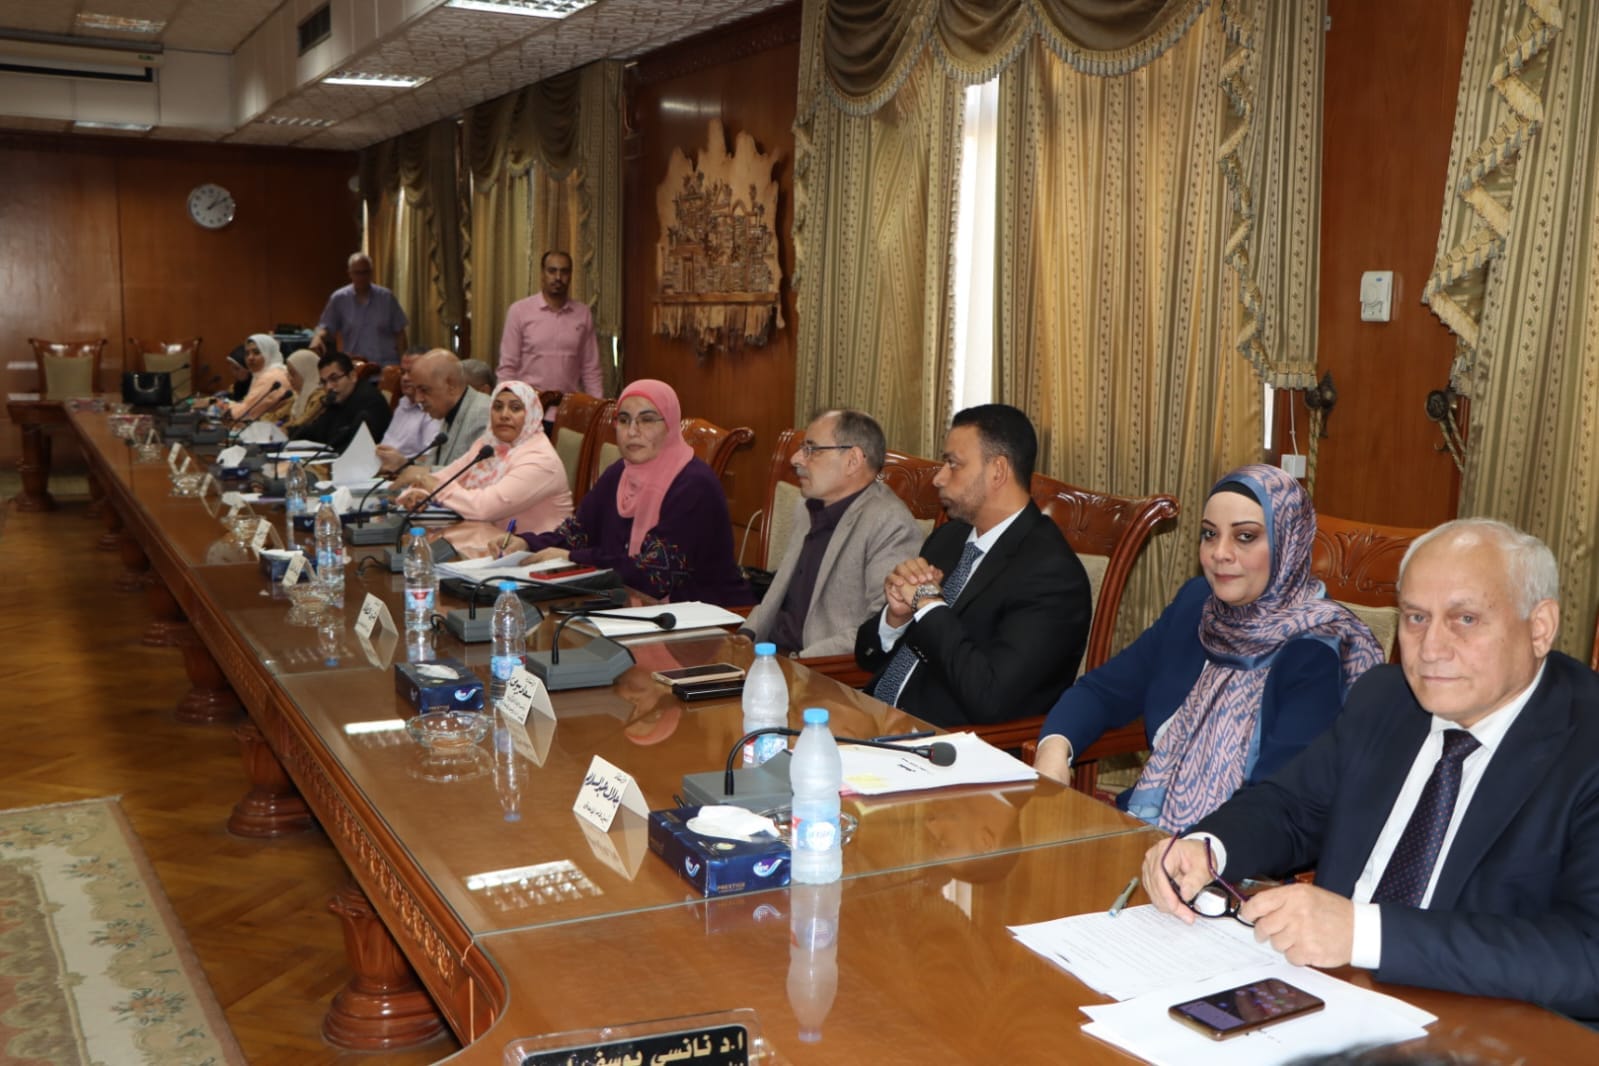 The President of Menoufia University convenes the Facilities Committee and meets with officials of Arab contractors